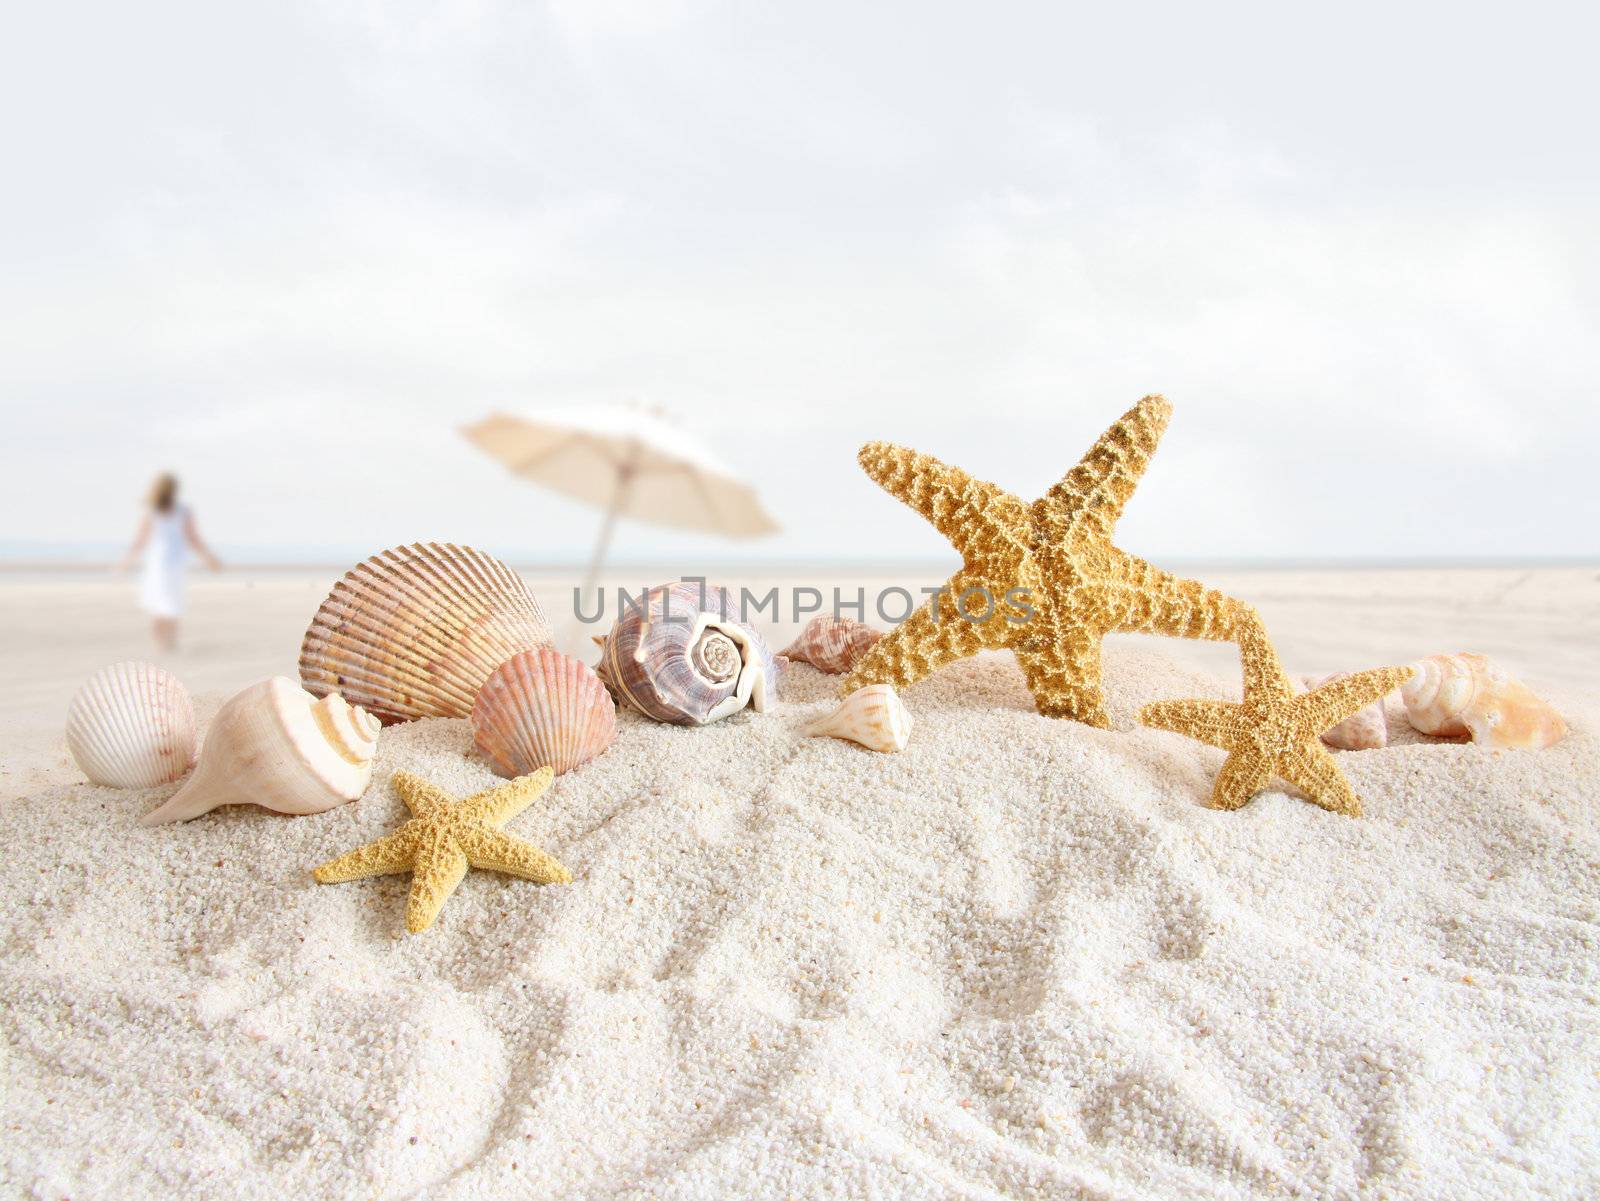 Starfish and seashells  at the beach by Sandralise